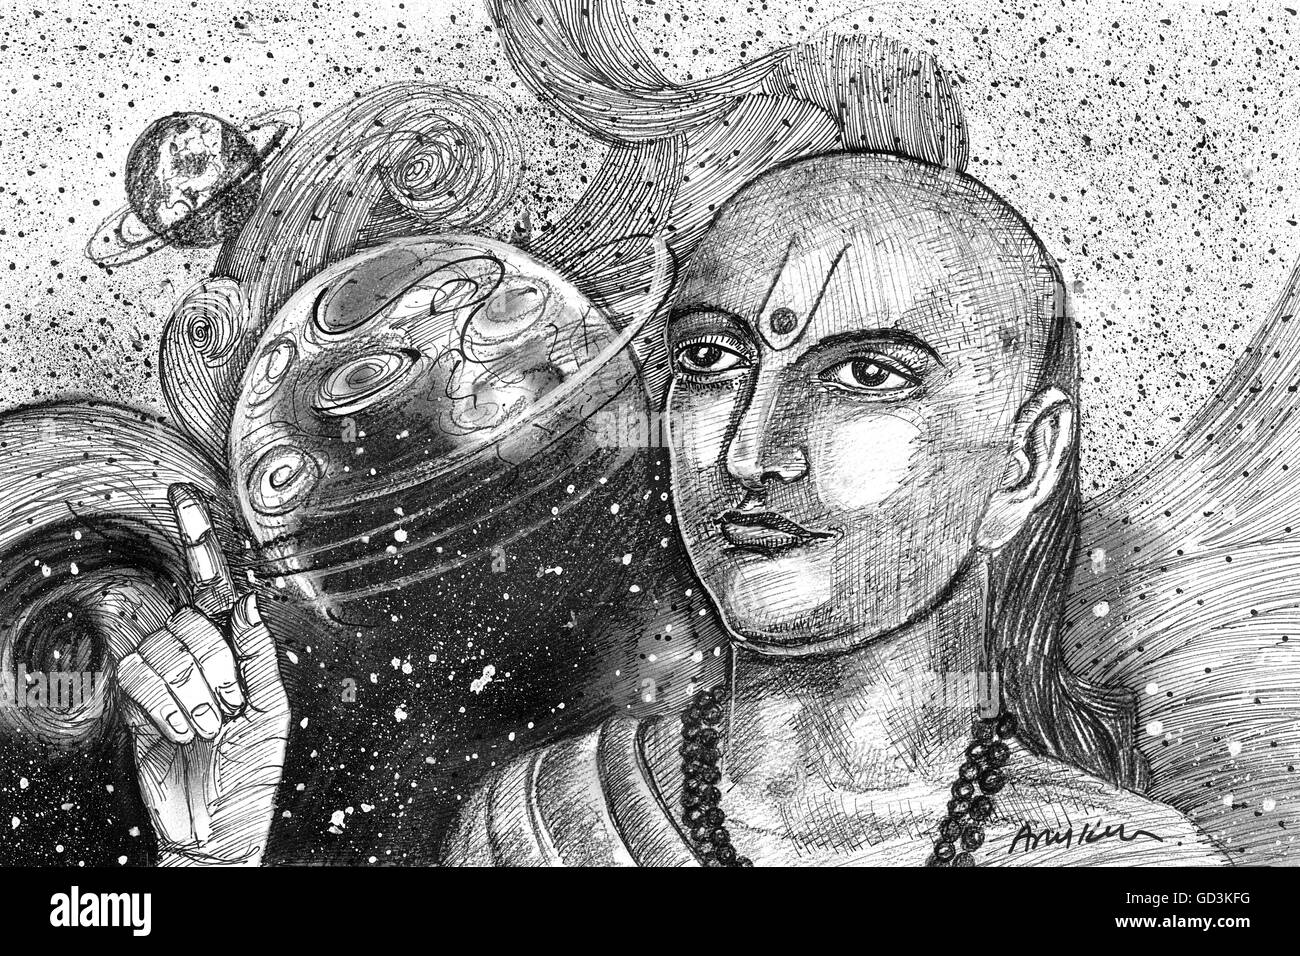 How to Draw Aryabhatta very easy step by step - YouTube